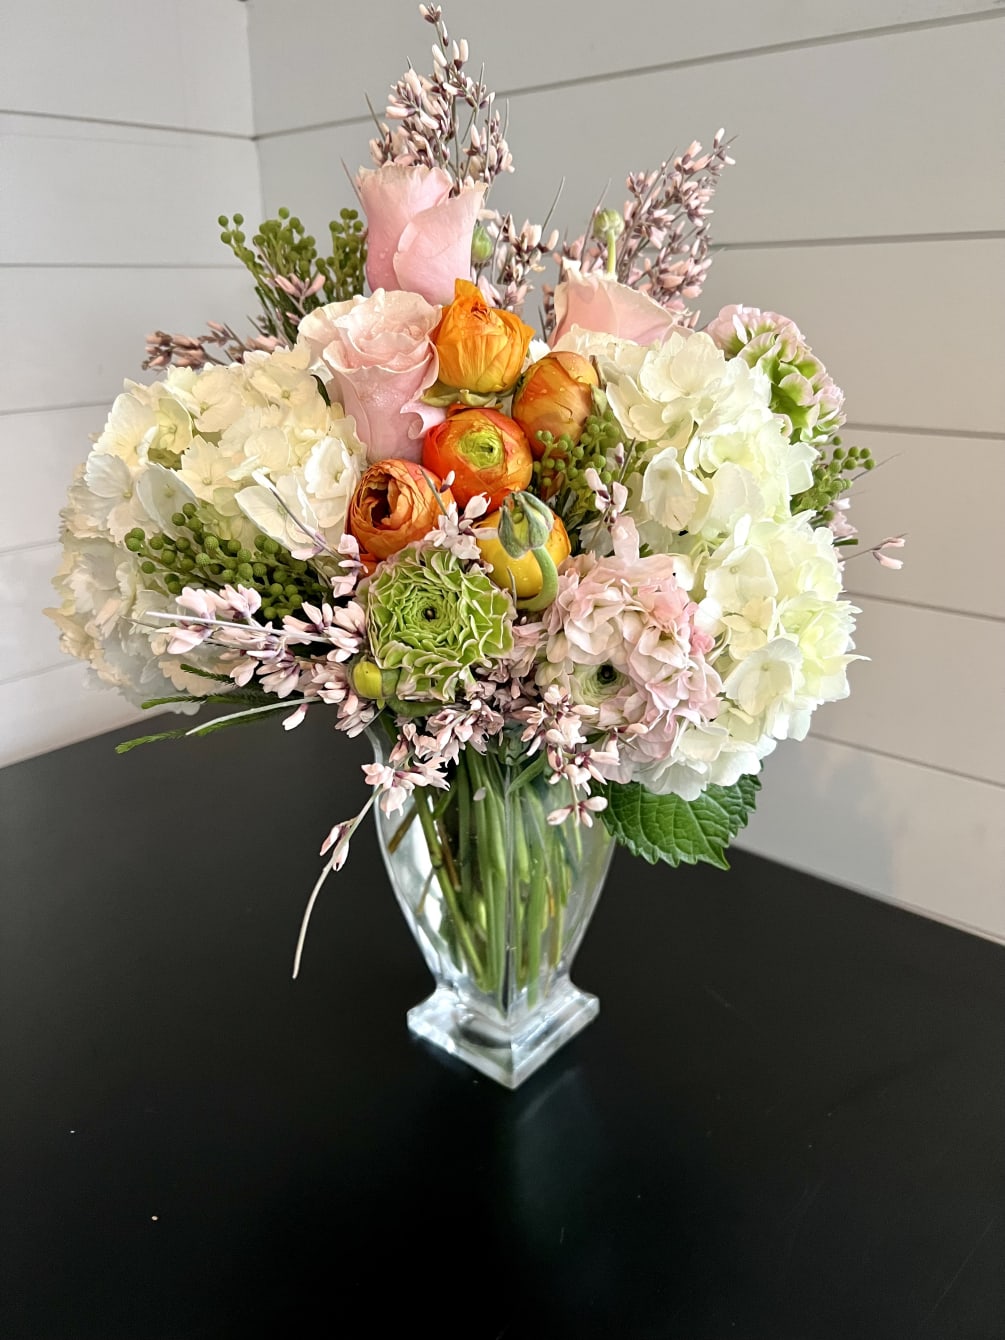 A lush collection of garden florals artfully arranged in an attractive clear